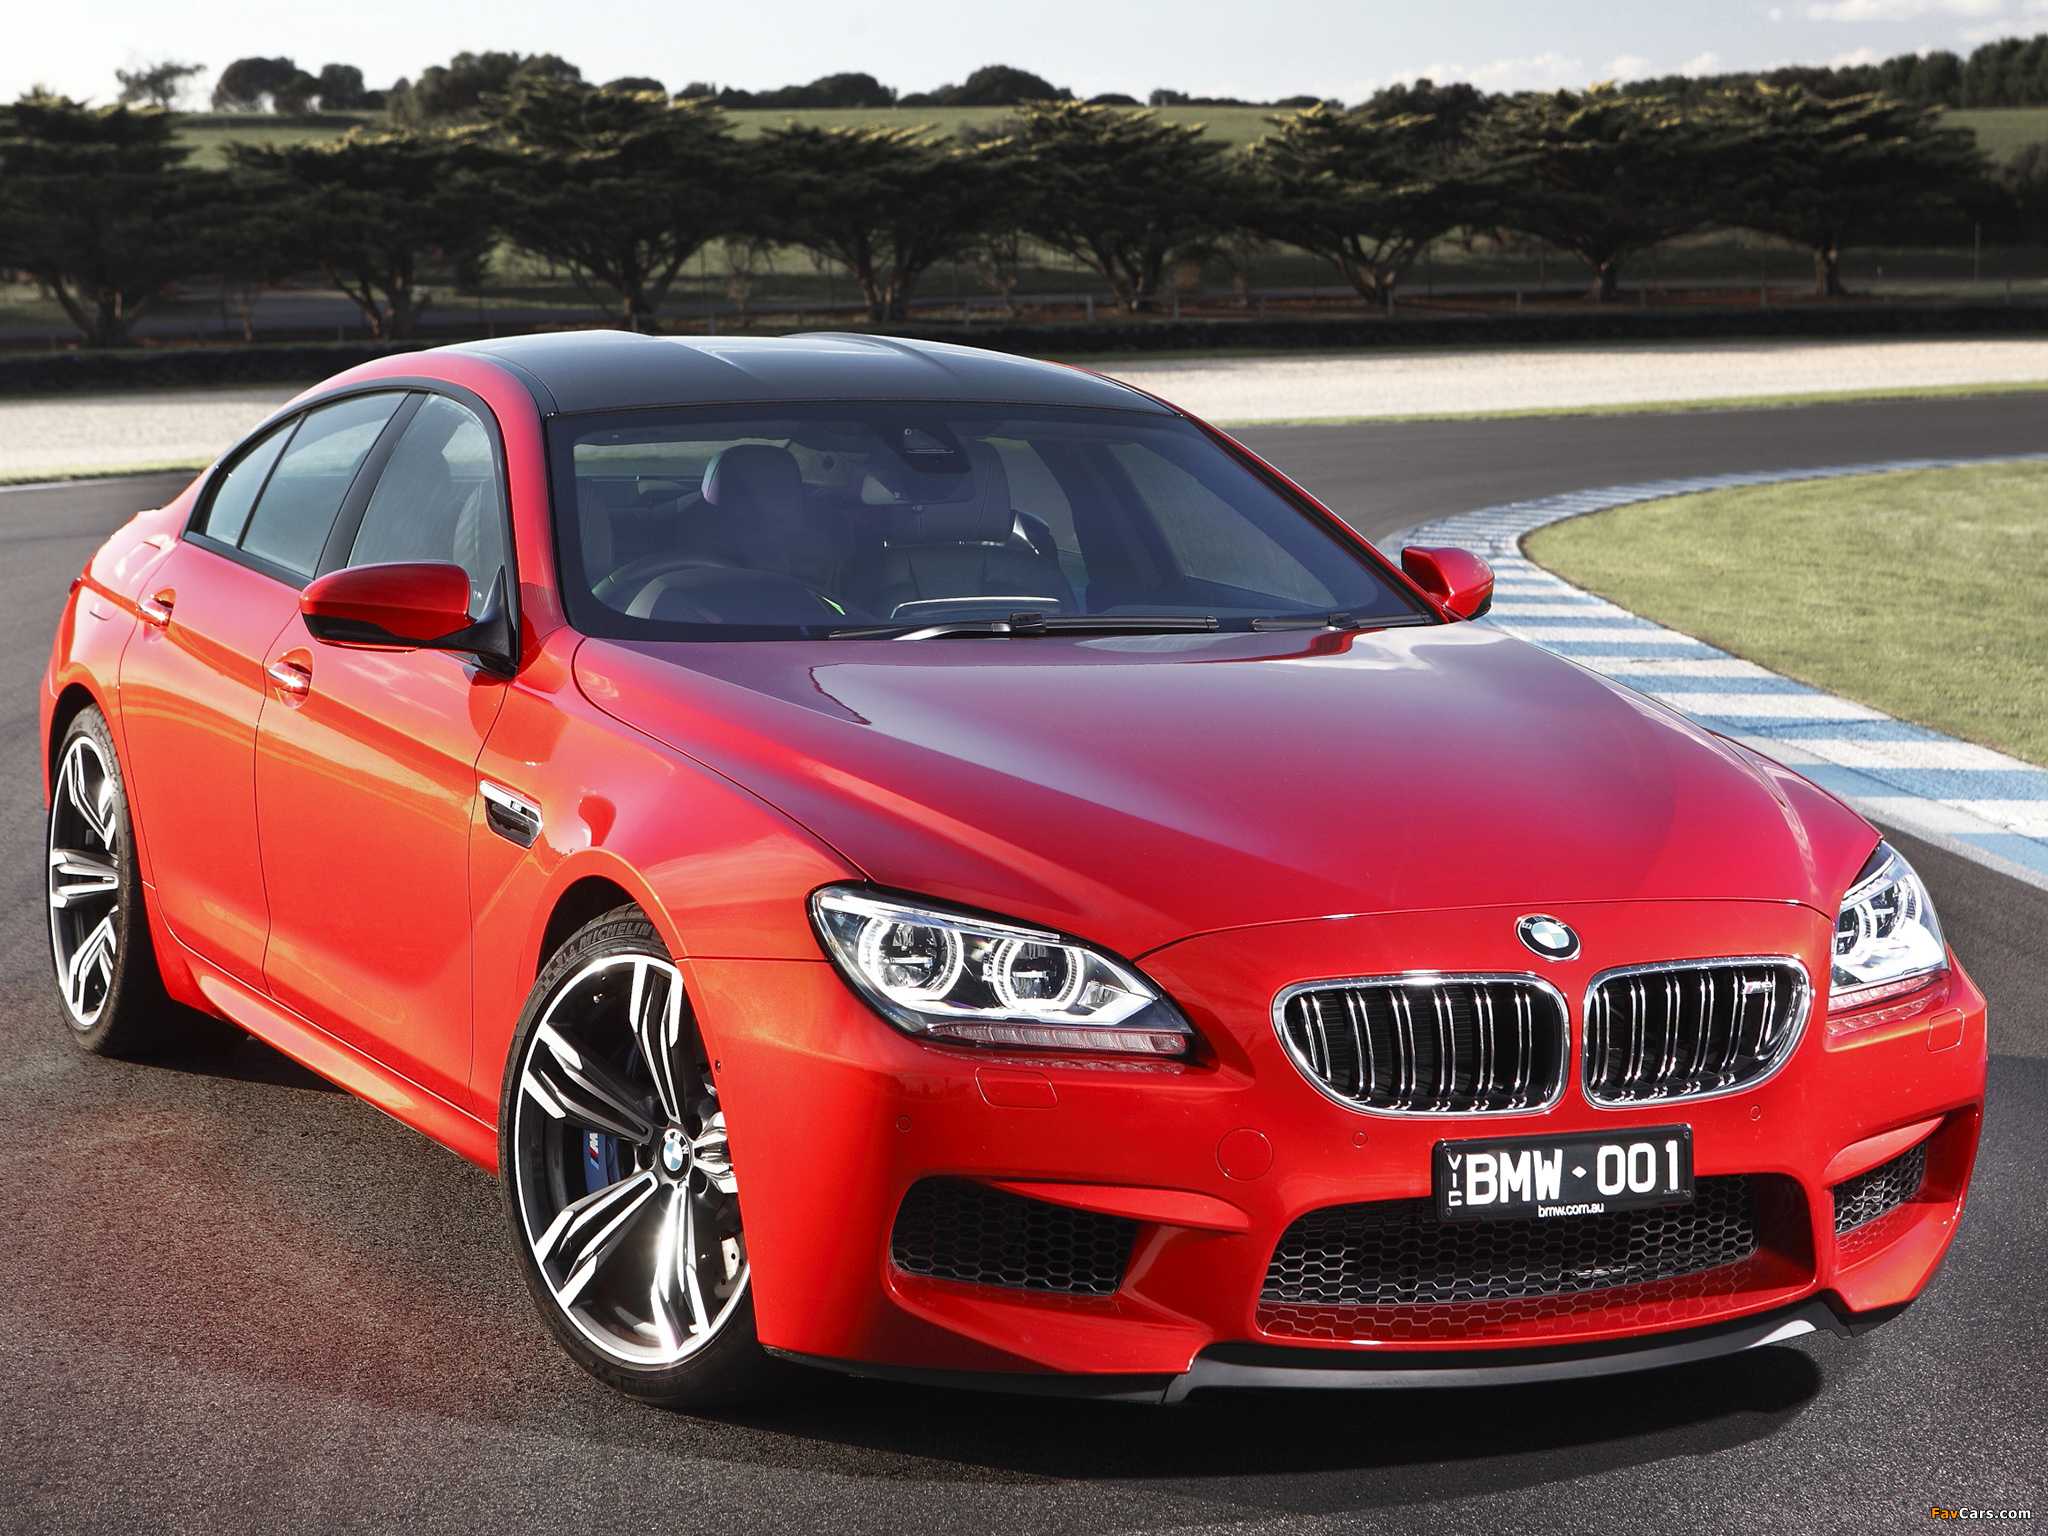 Bmw 6 m. BMW m6 f06. BMW m6 f06 Gran Coupe. BMW m6 Gran Coupe 2013. BMW 6 f06 Gran Coupe Red.